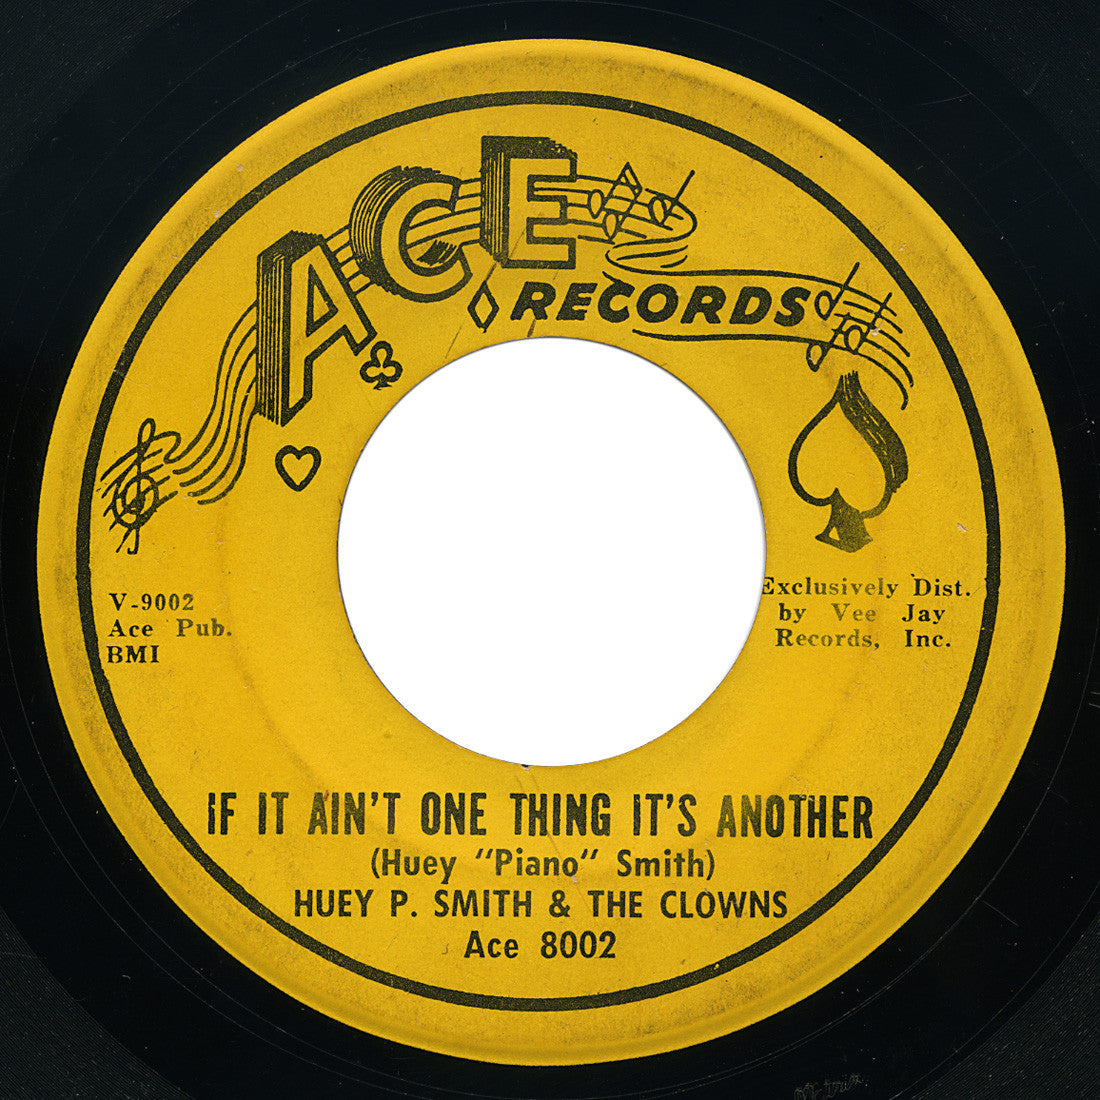 Huey P. Smith & The Clowns – If It Ain’t One Thing It’s Another – Ace